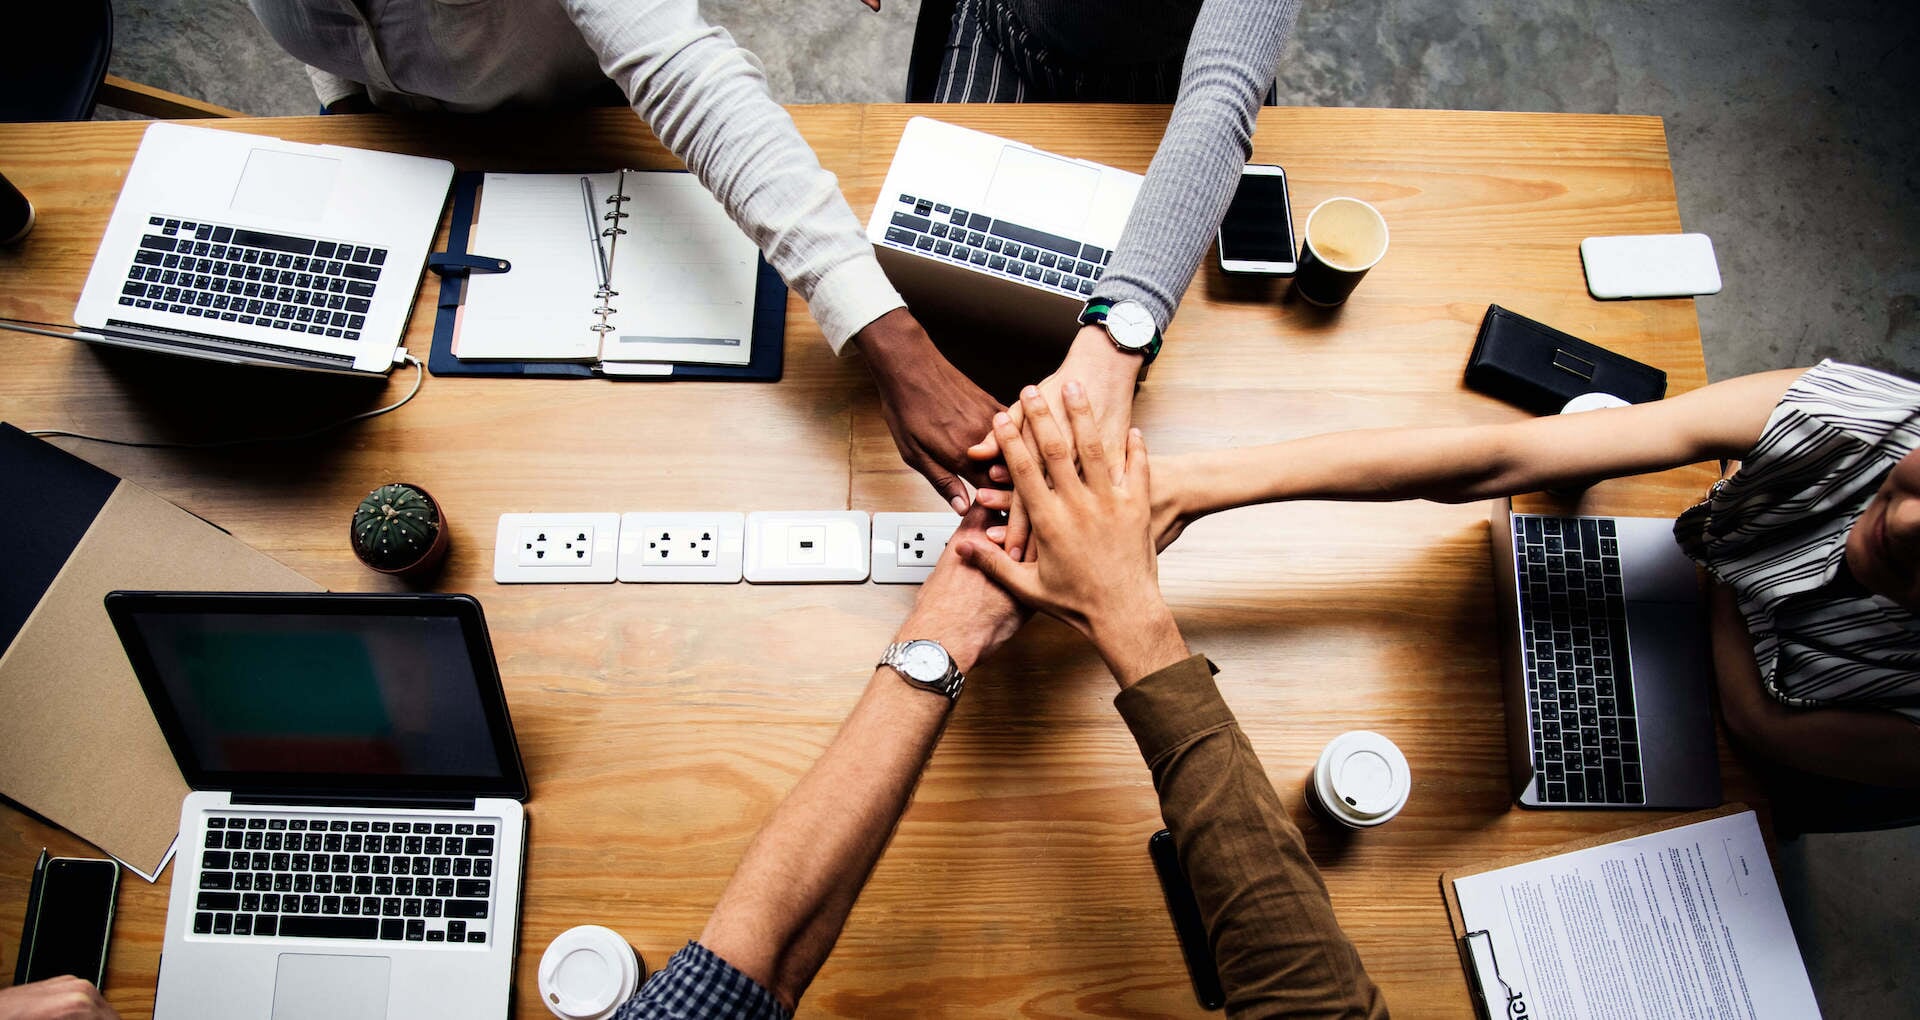 Overhead shot of 5 people putting hands in middle of conference table to show teamwork